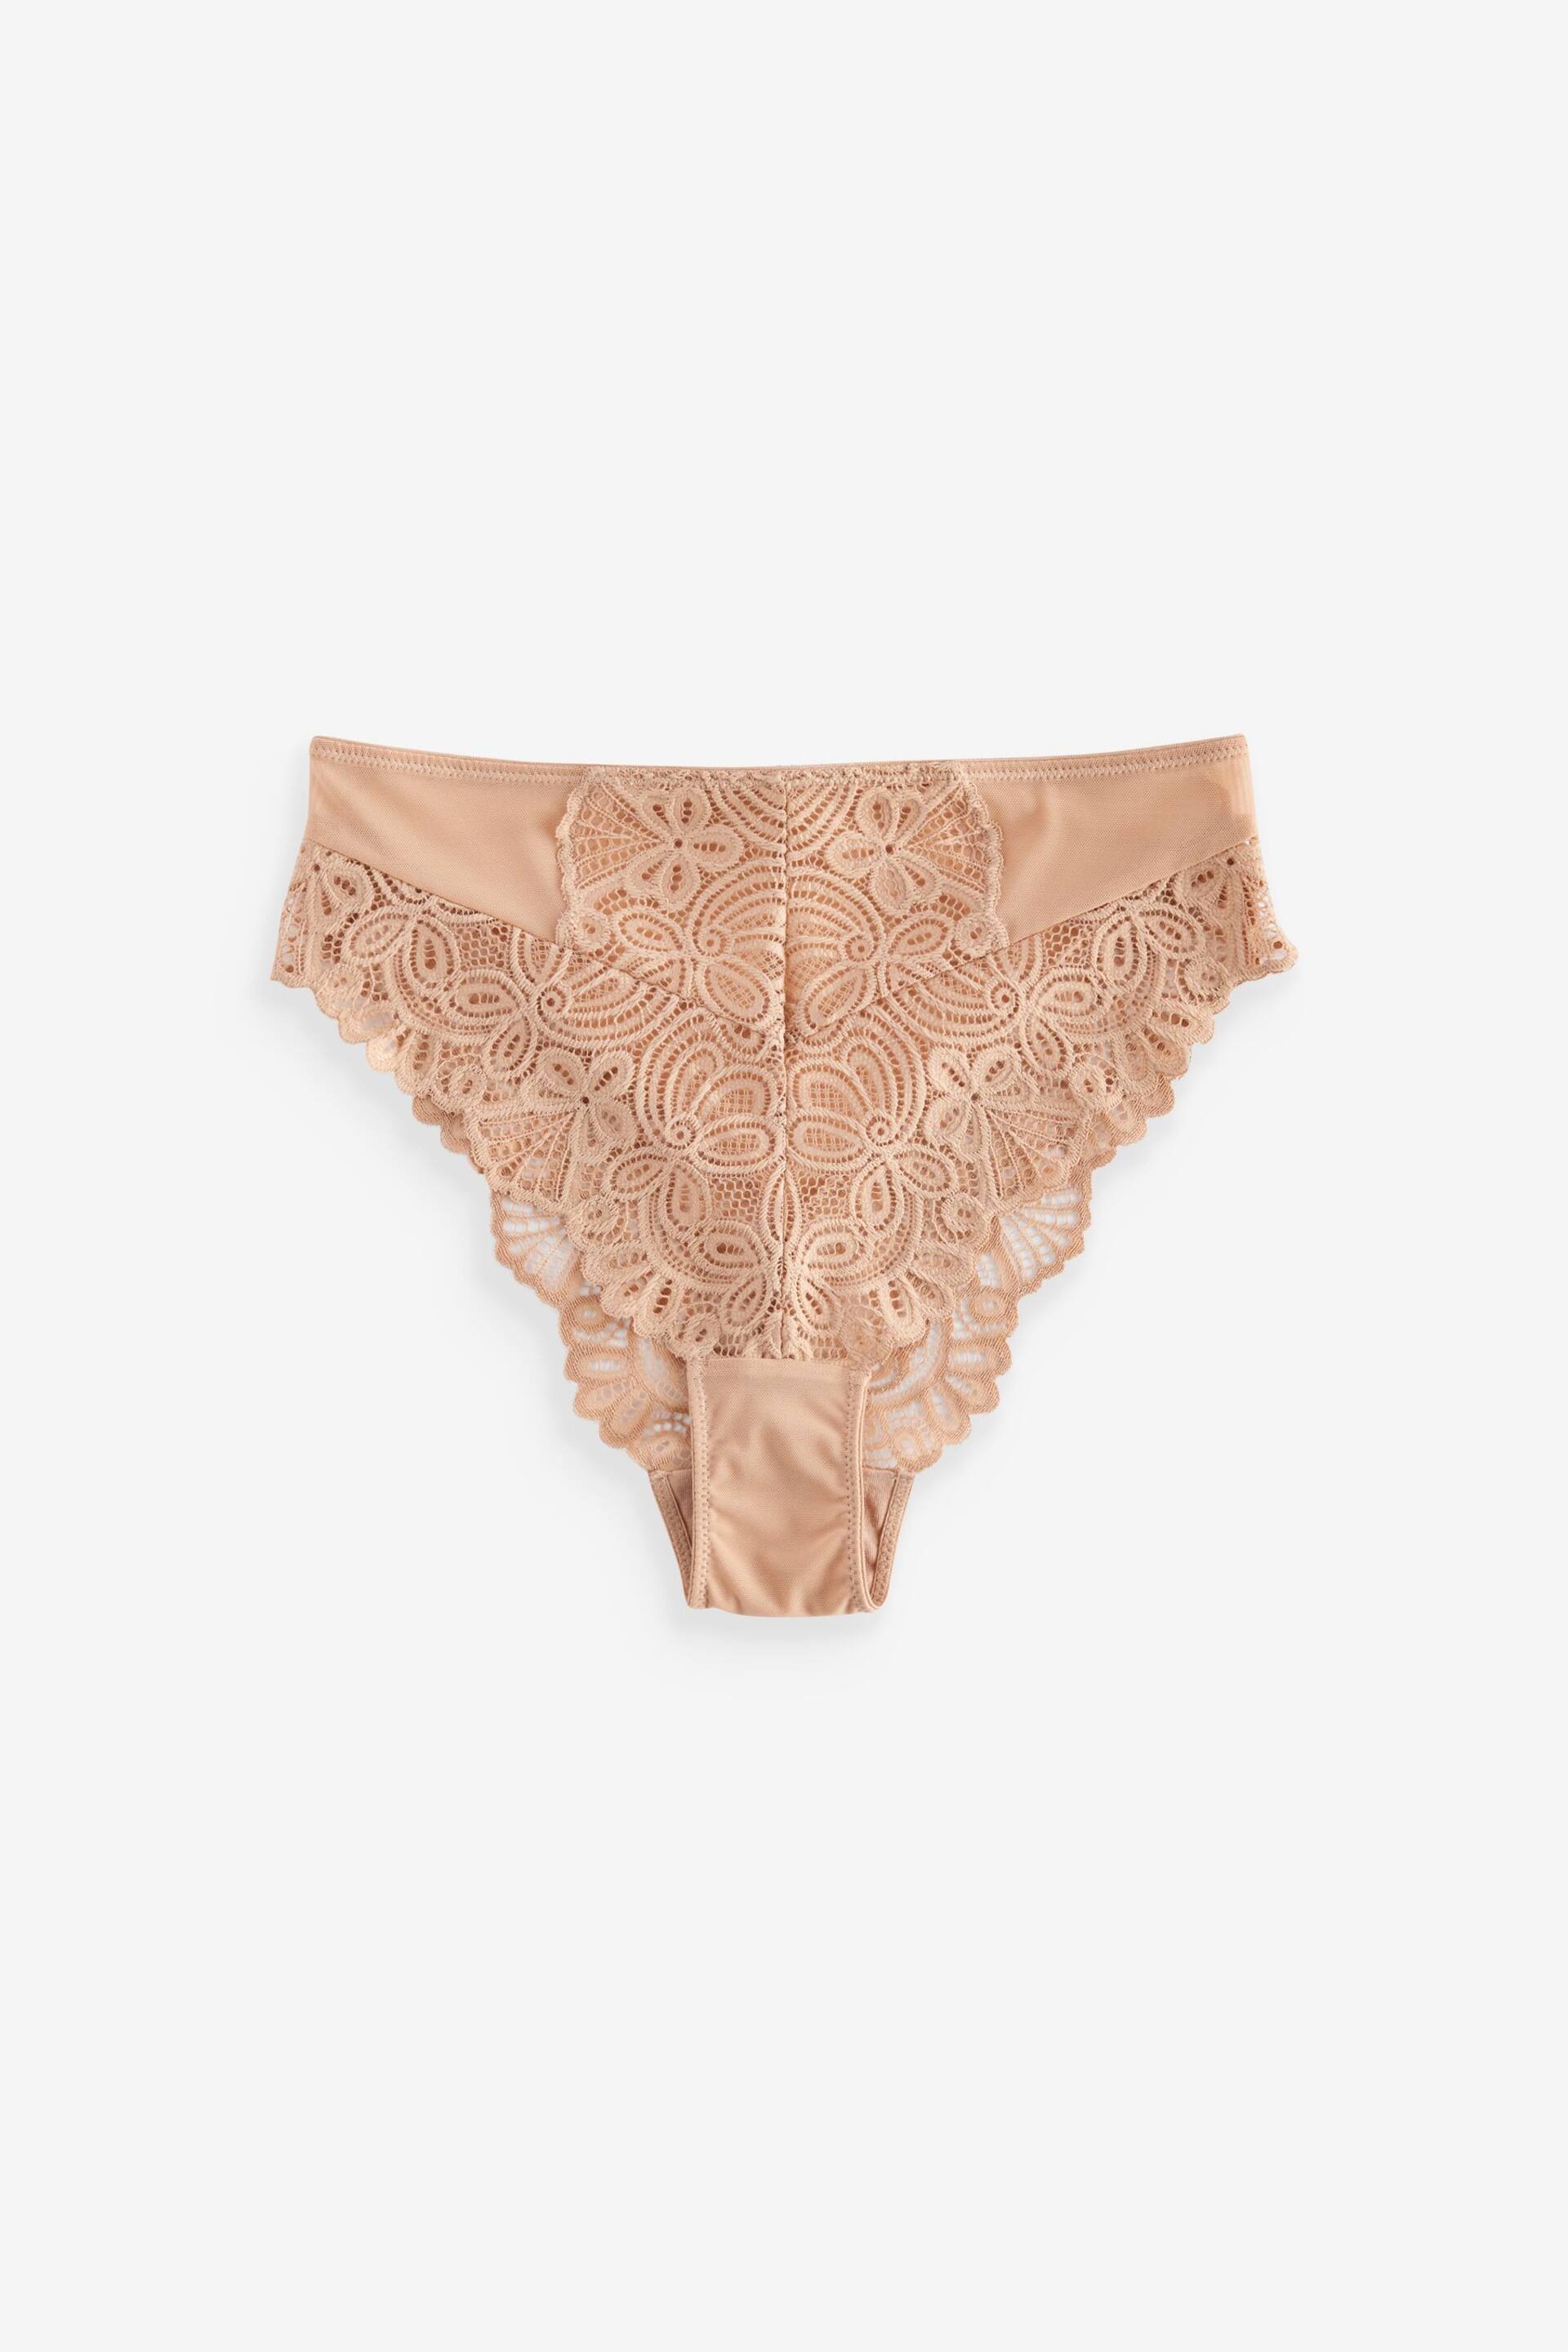 Neutral Lace High Waist High Leg Knickers - Image 4 of 4